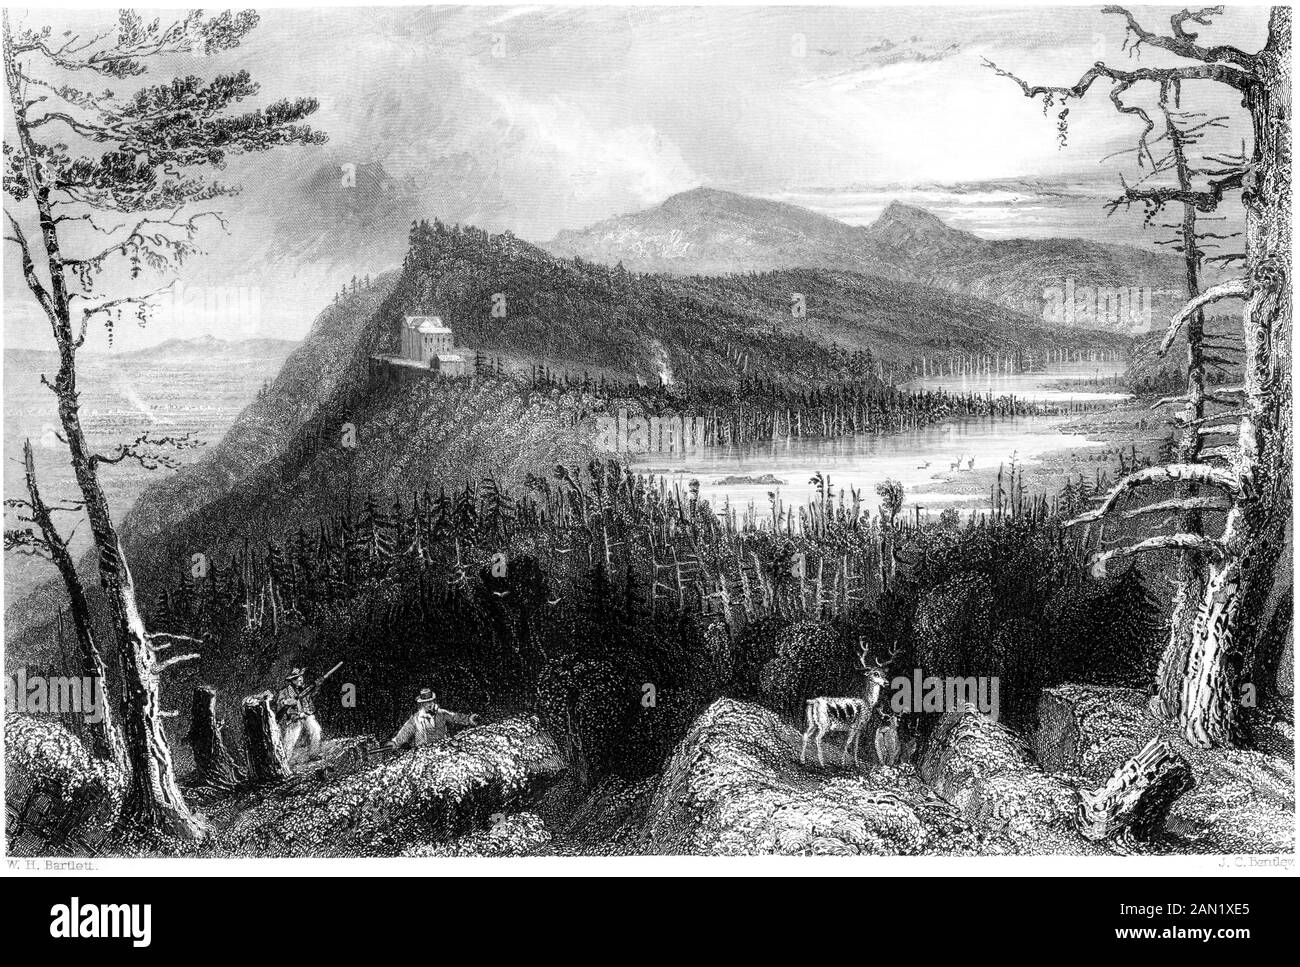 Engraving of The Two Lakes and the Mountain House on the Catskills scanned at high resolution. from a book printed in 1840. Believed copyright free. Stock Photo